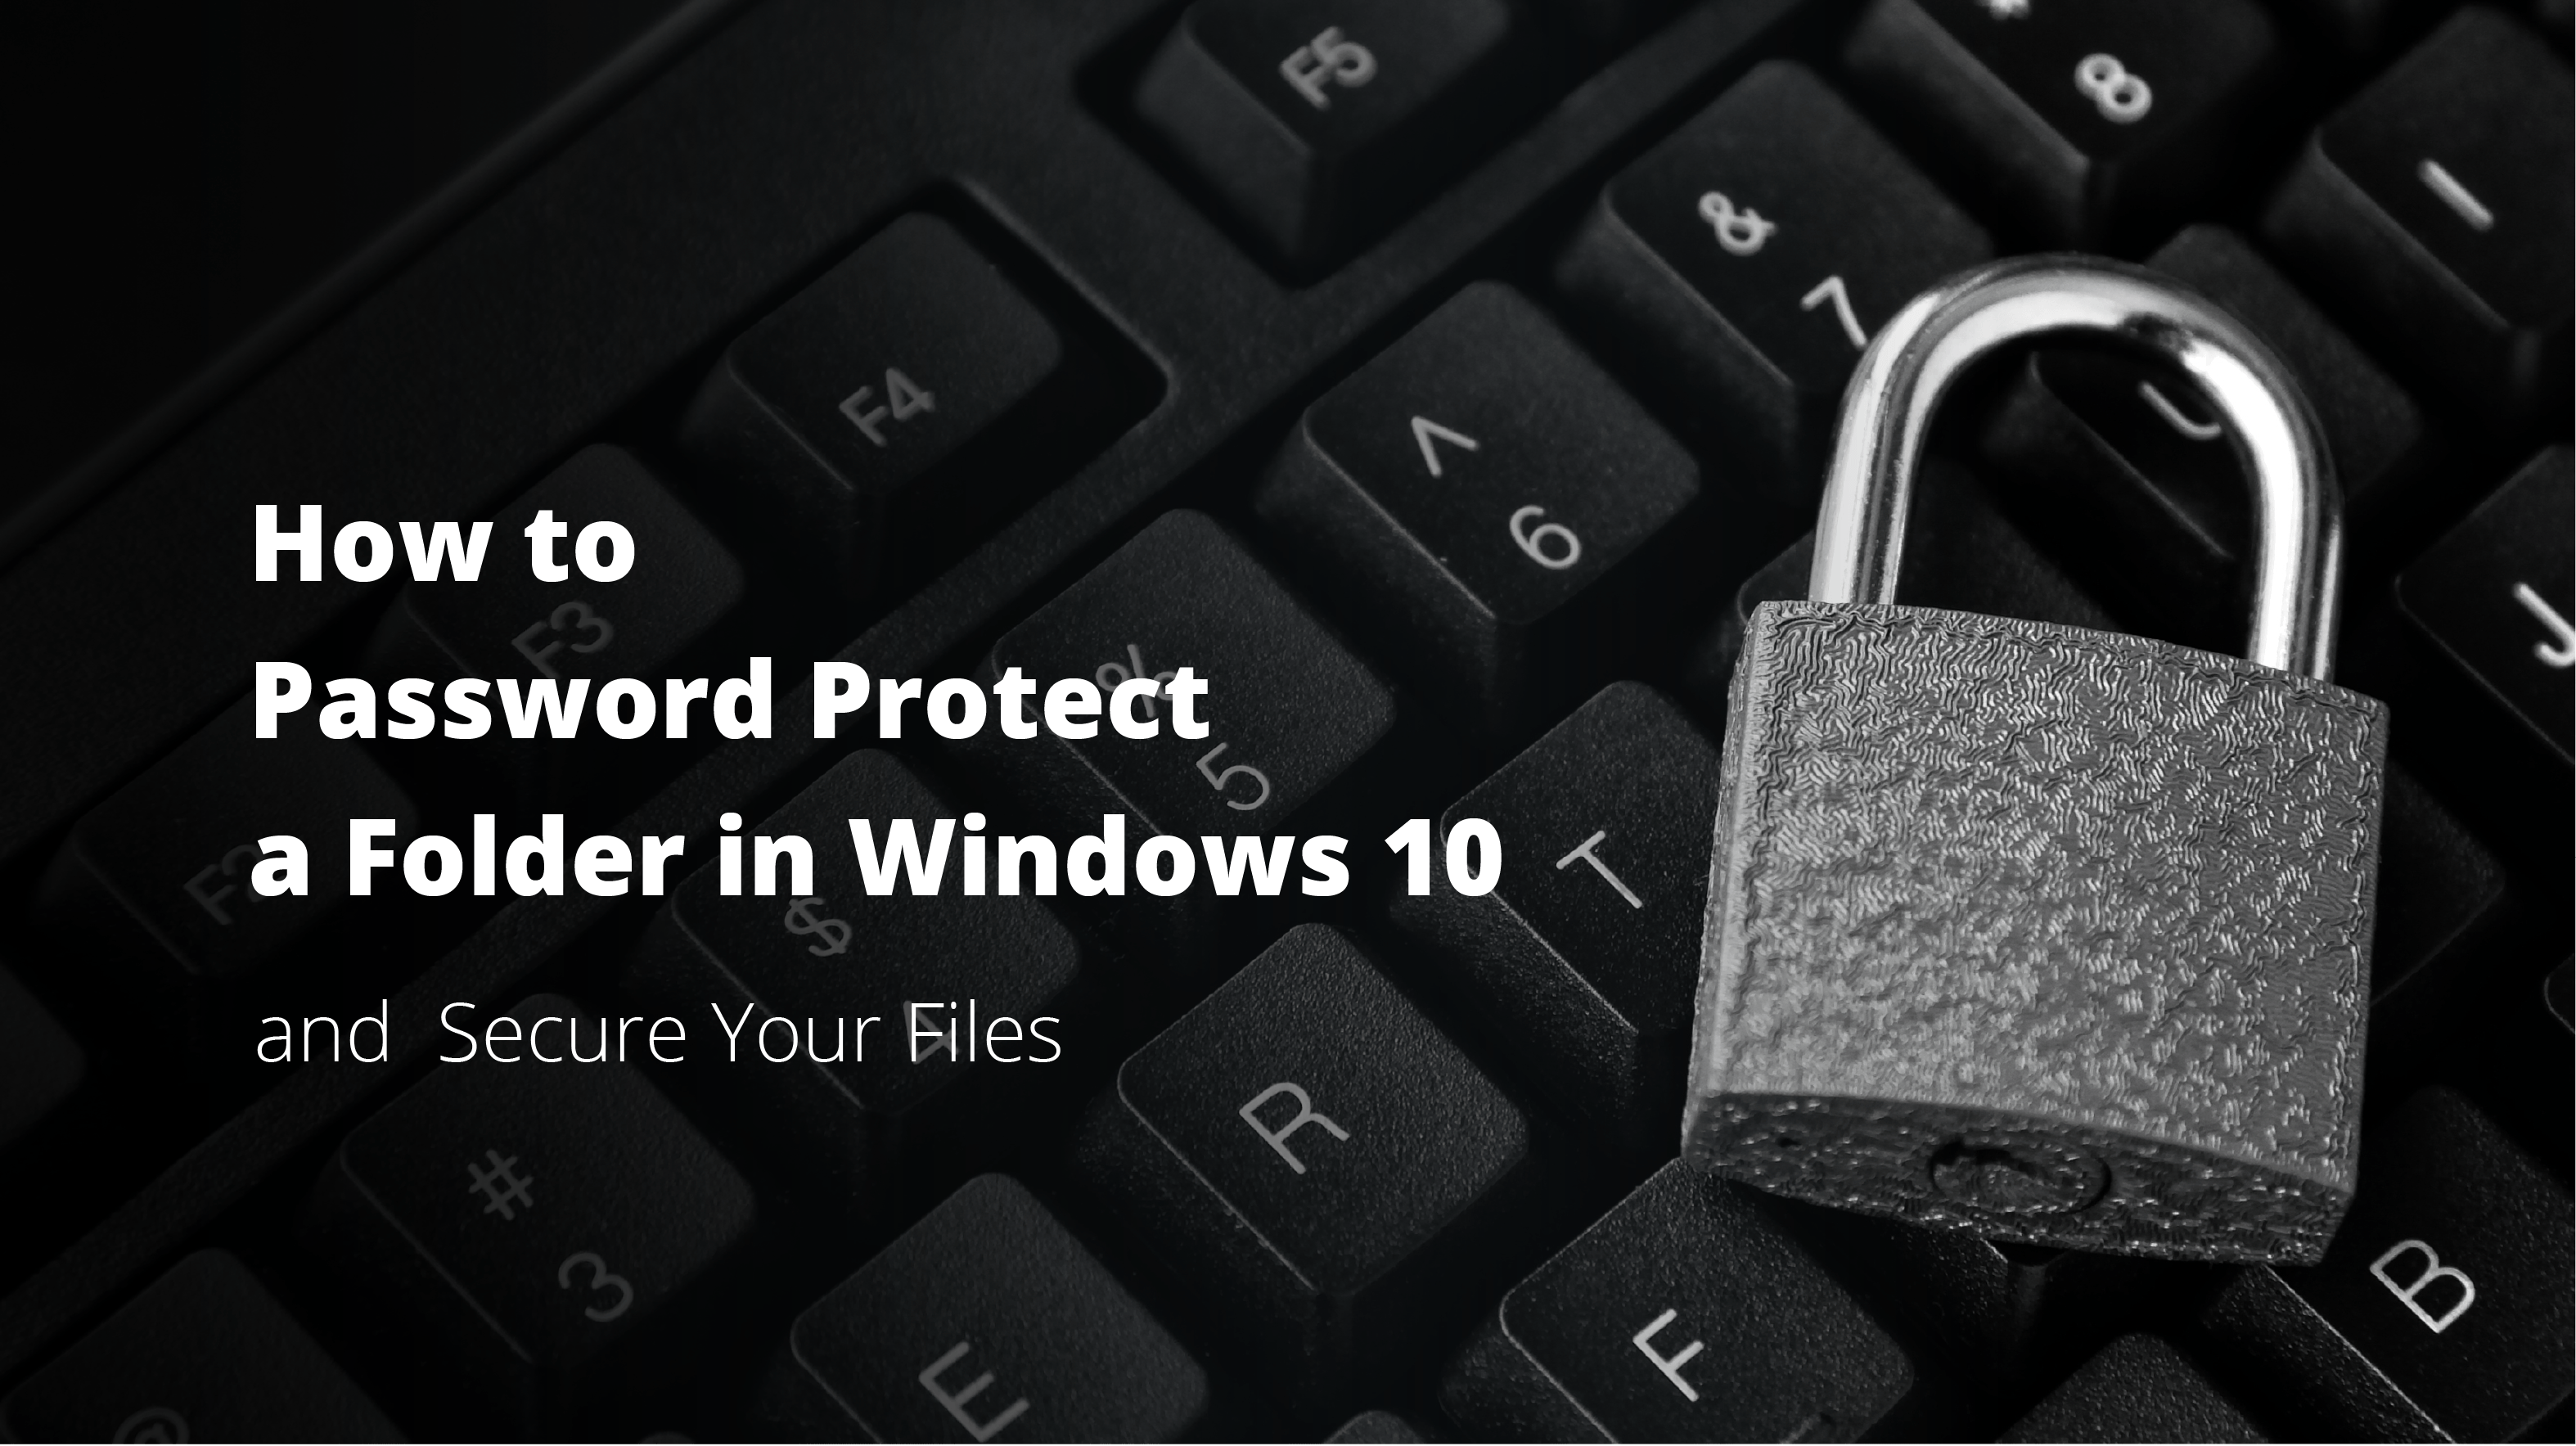 <b>How to Password Protect Folders in Windows 10 and Secure Your Files?</b>